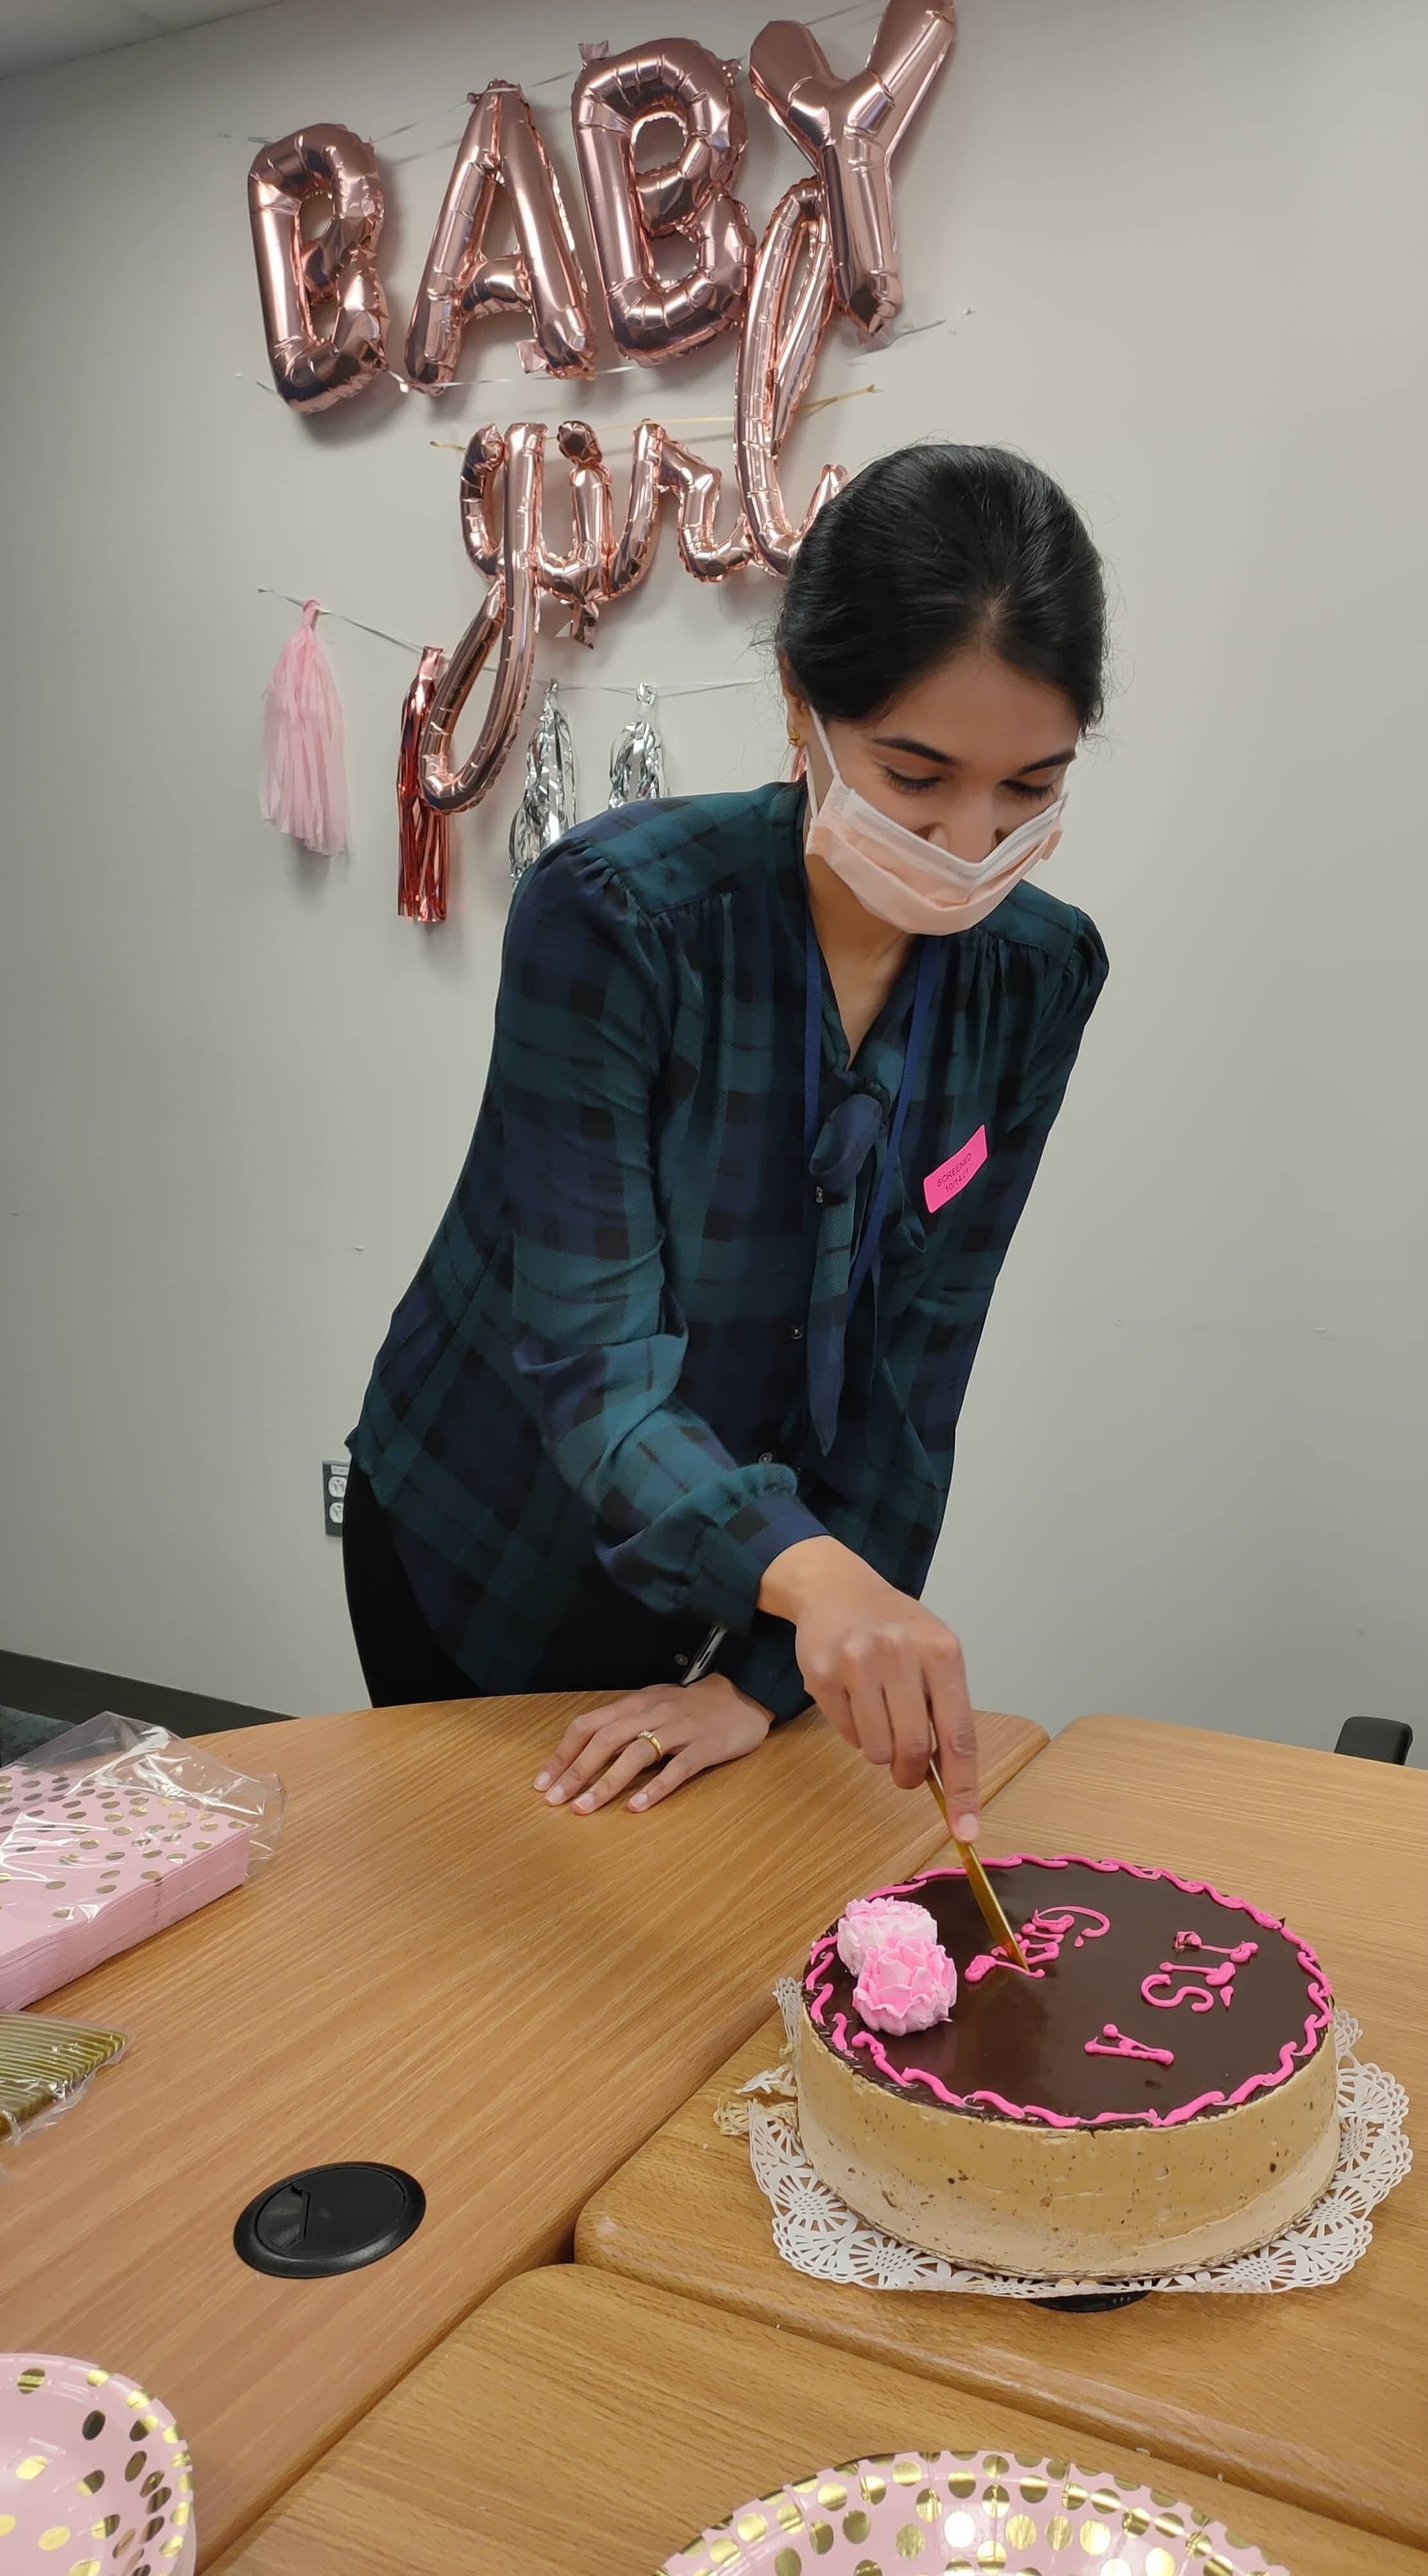 Lab member cutting a cake that reads It's a Girl.